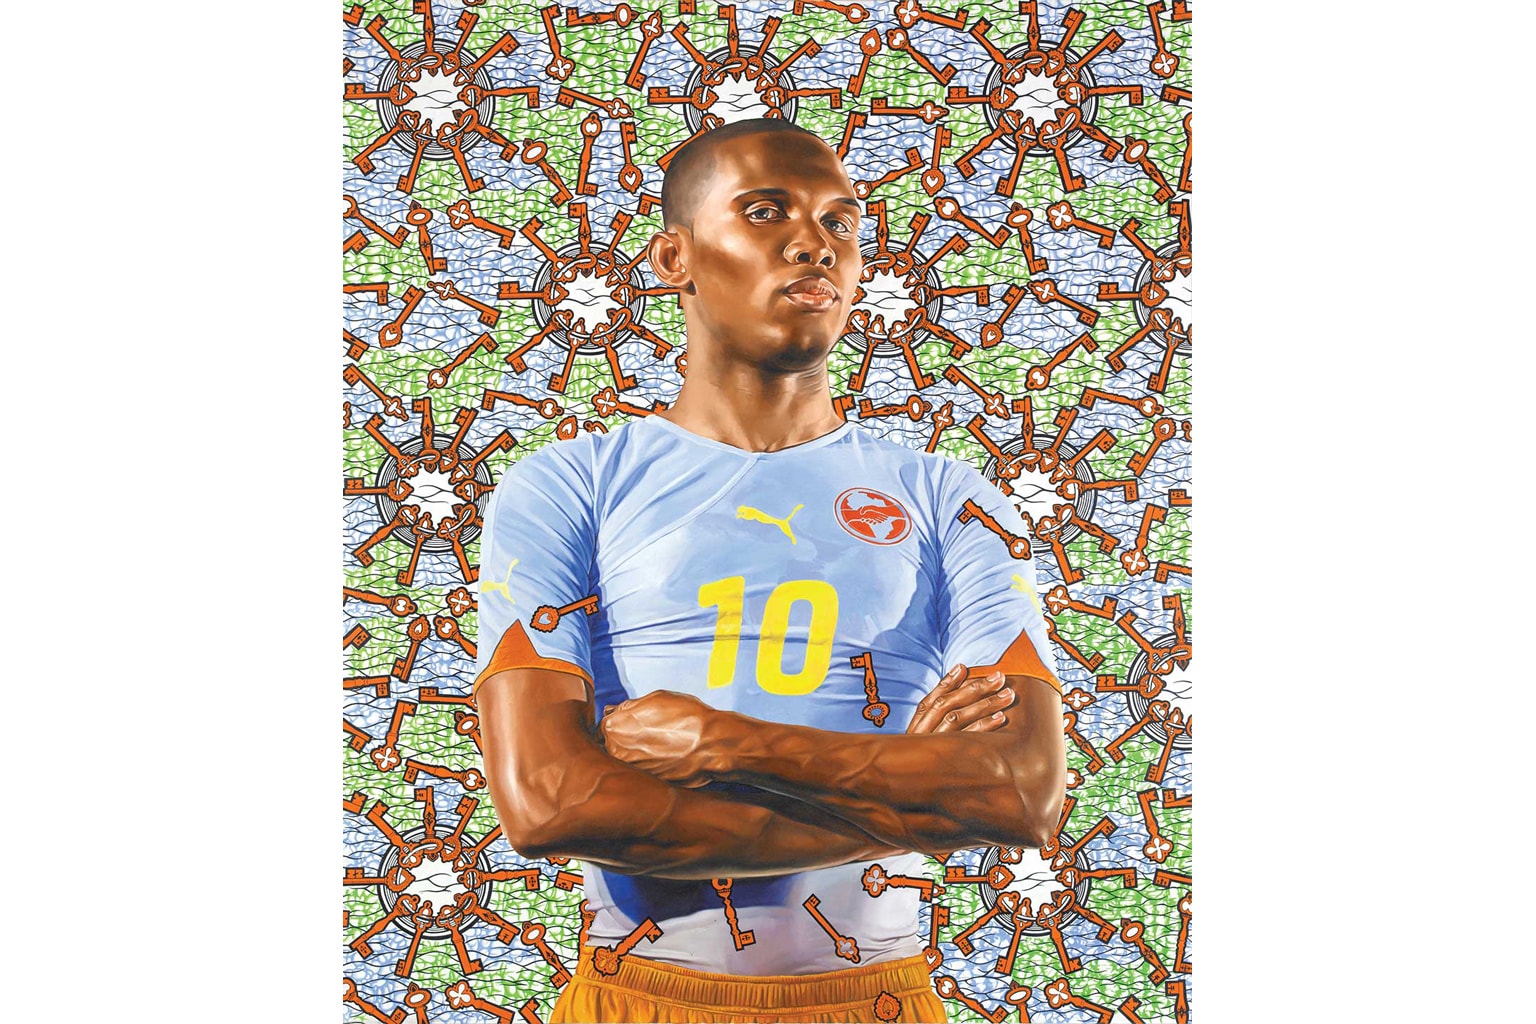 perez art museum miami fifa world cup exhibition kehinde wiley artworks paintings sculptures installations